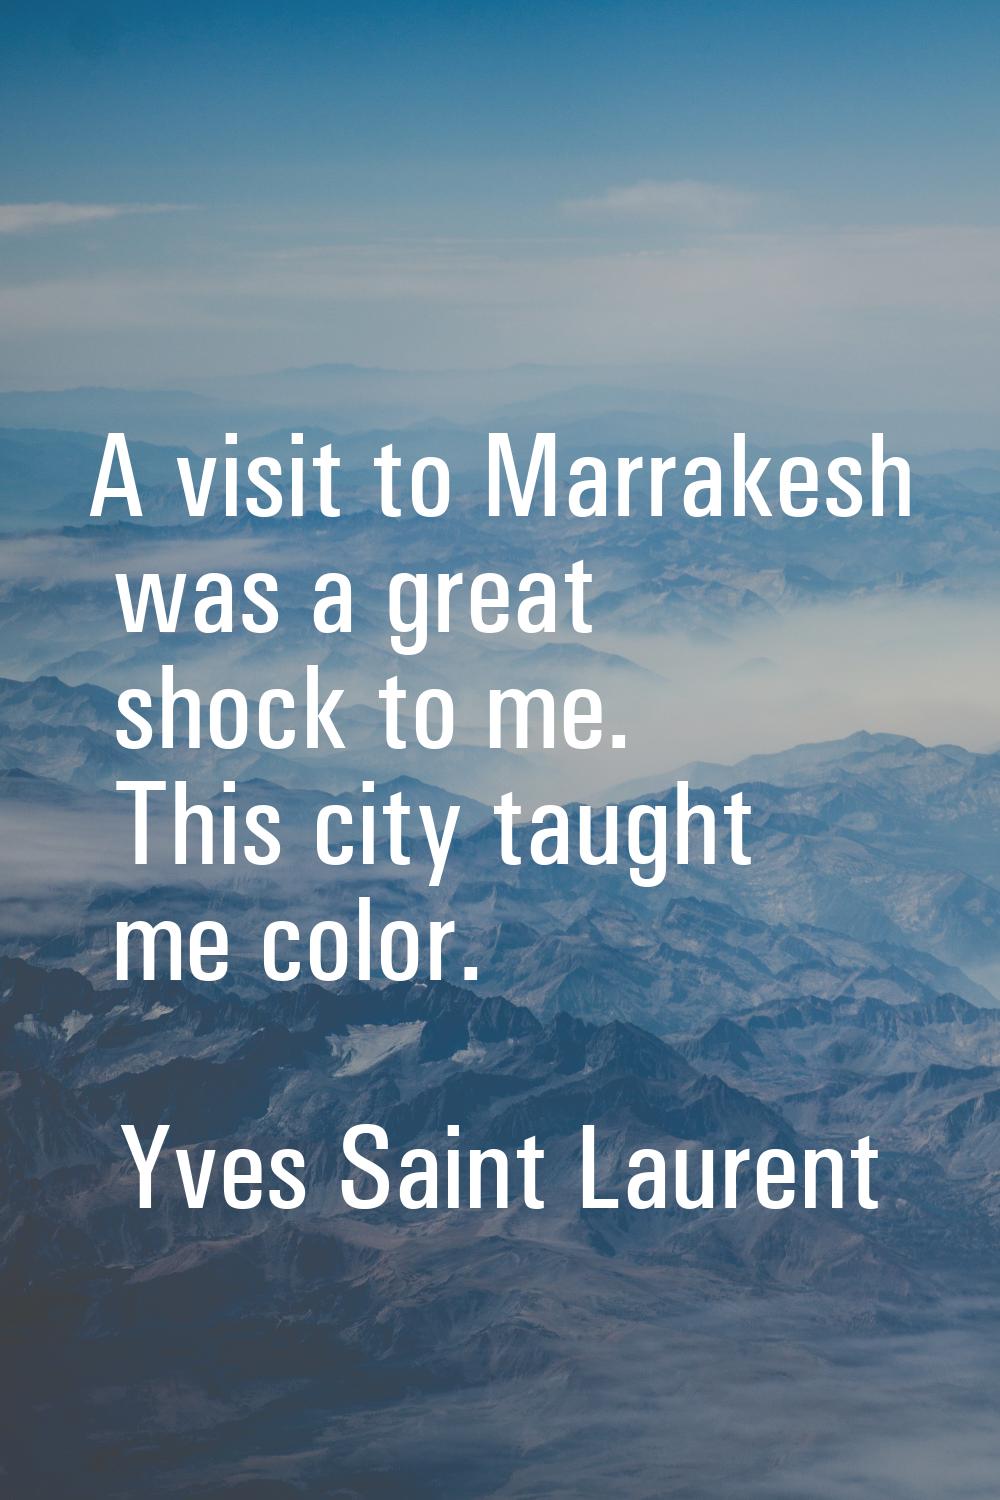 A visit to Marrakesh was a great shock to me. This city taught me color.